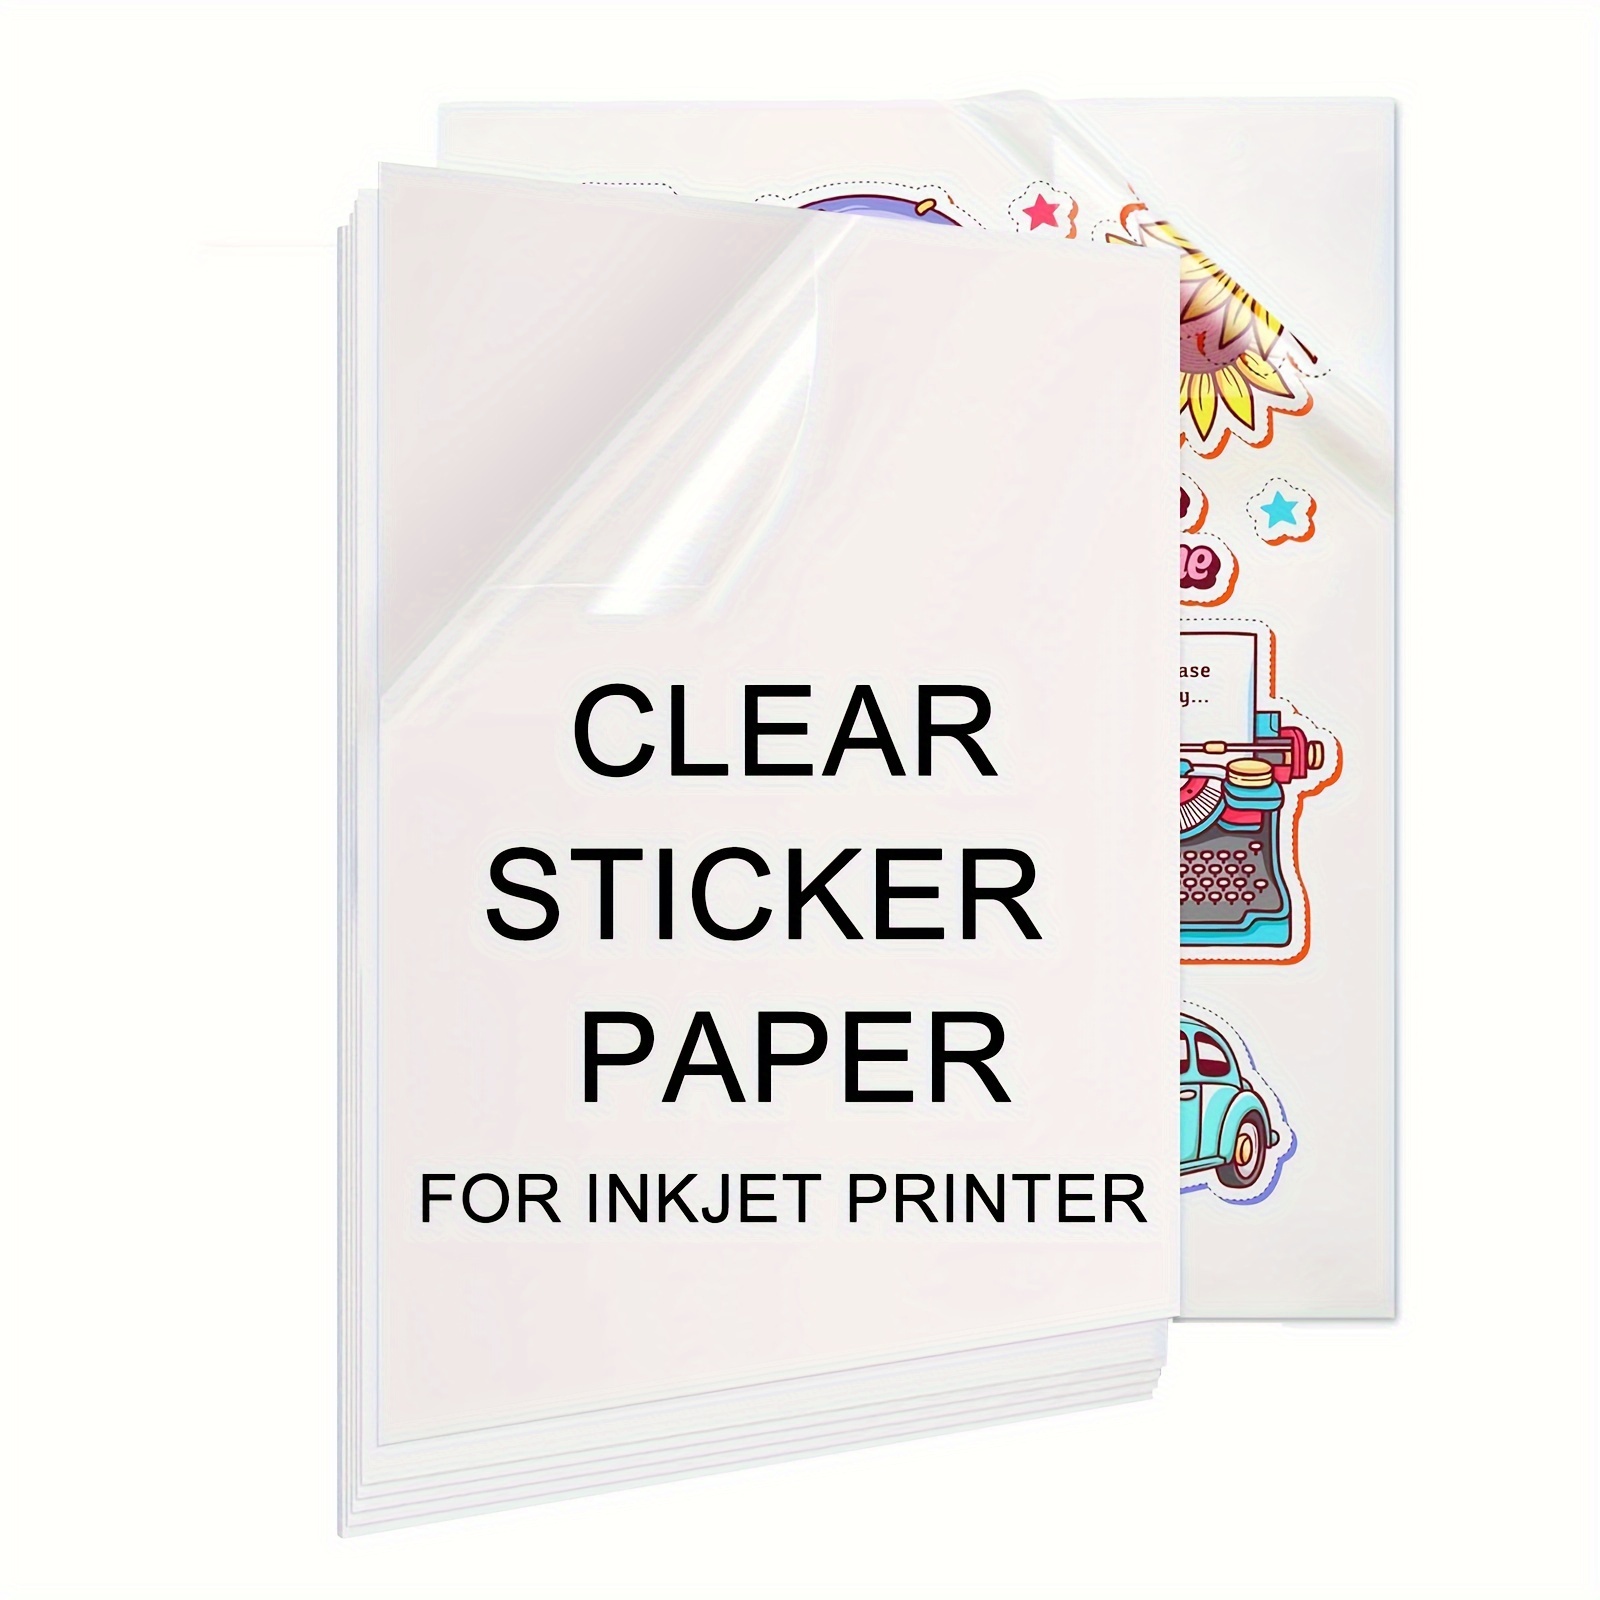 

Printable Vinyl Sticker Paper For Inkjet Printers, 100% Clear Transparent, Non-waterproof, Self-adhesive Decal Sheets 8.3"x11.7", Quick-dry & Beautiful Ink Hold - Ideal For Daily Office Use